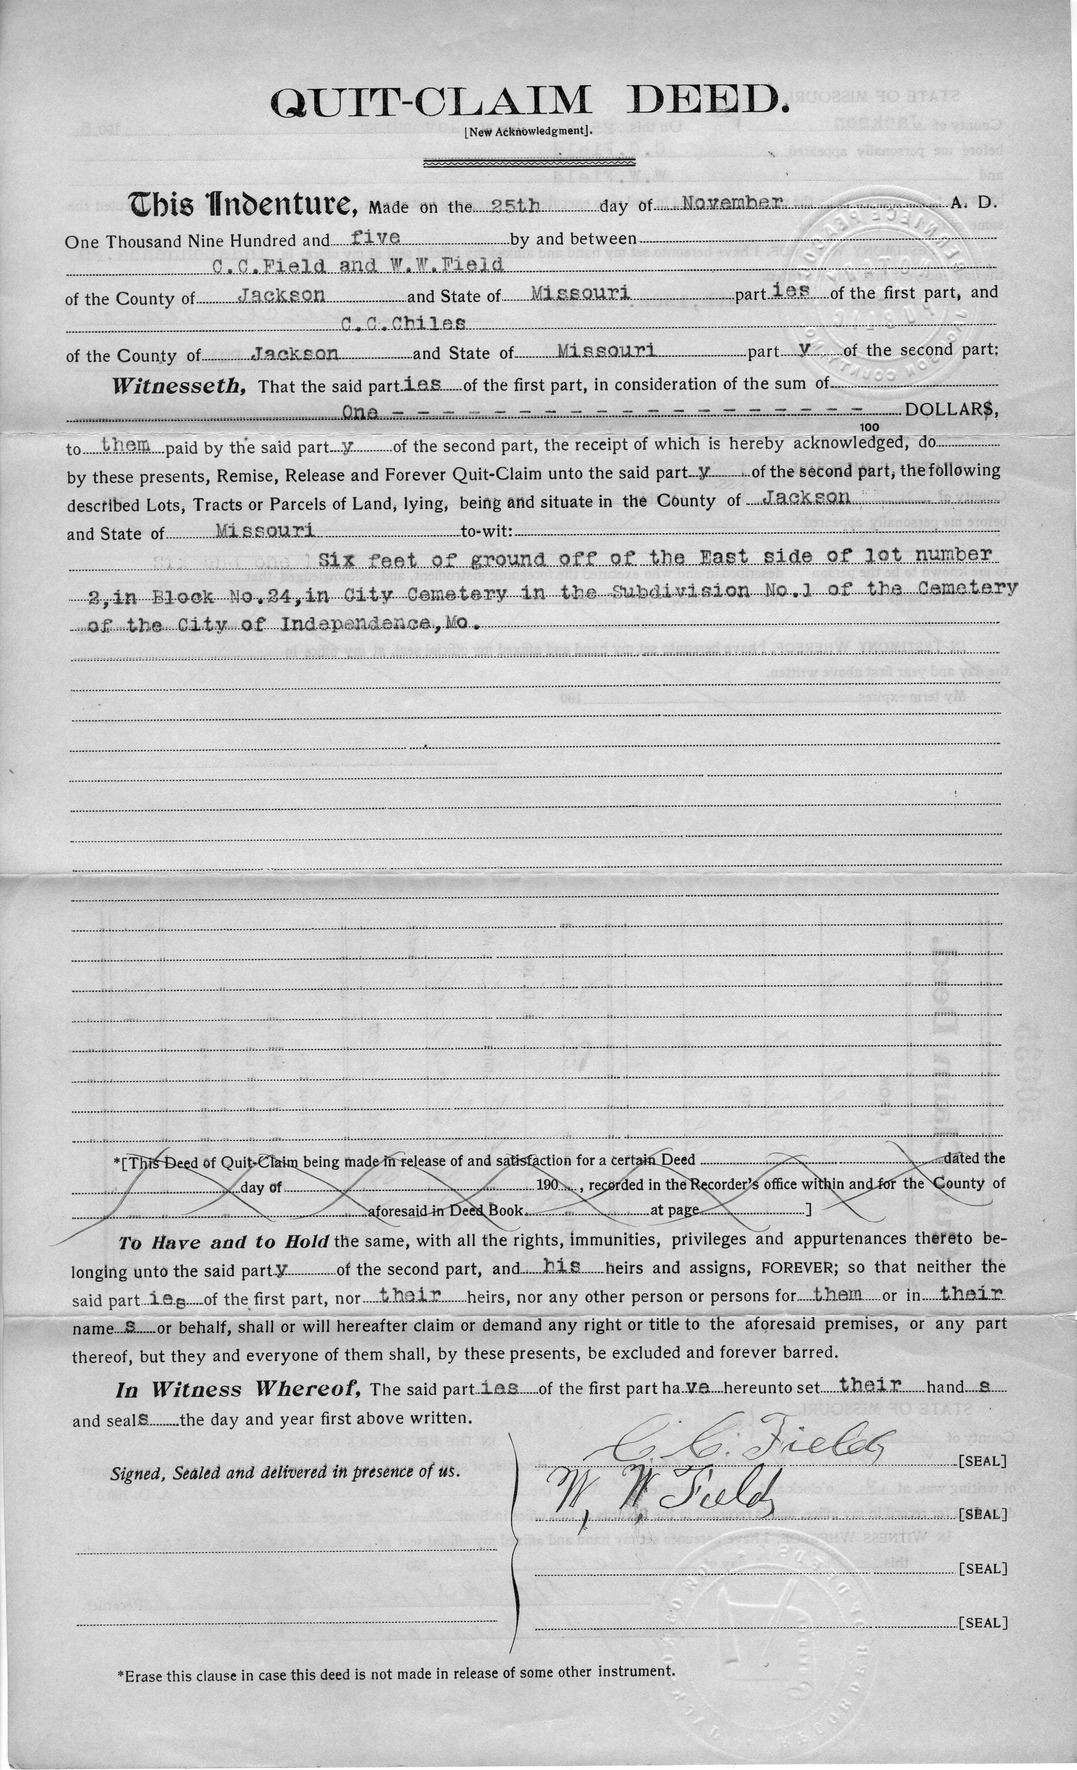 Quit-Claim Deed from C. C. Field and W. W. Field to C. C. Chiles